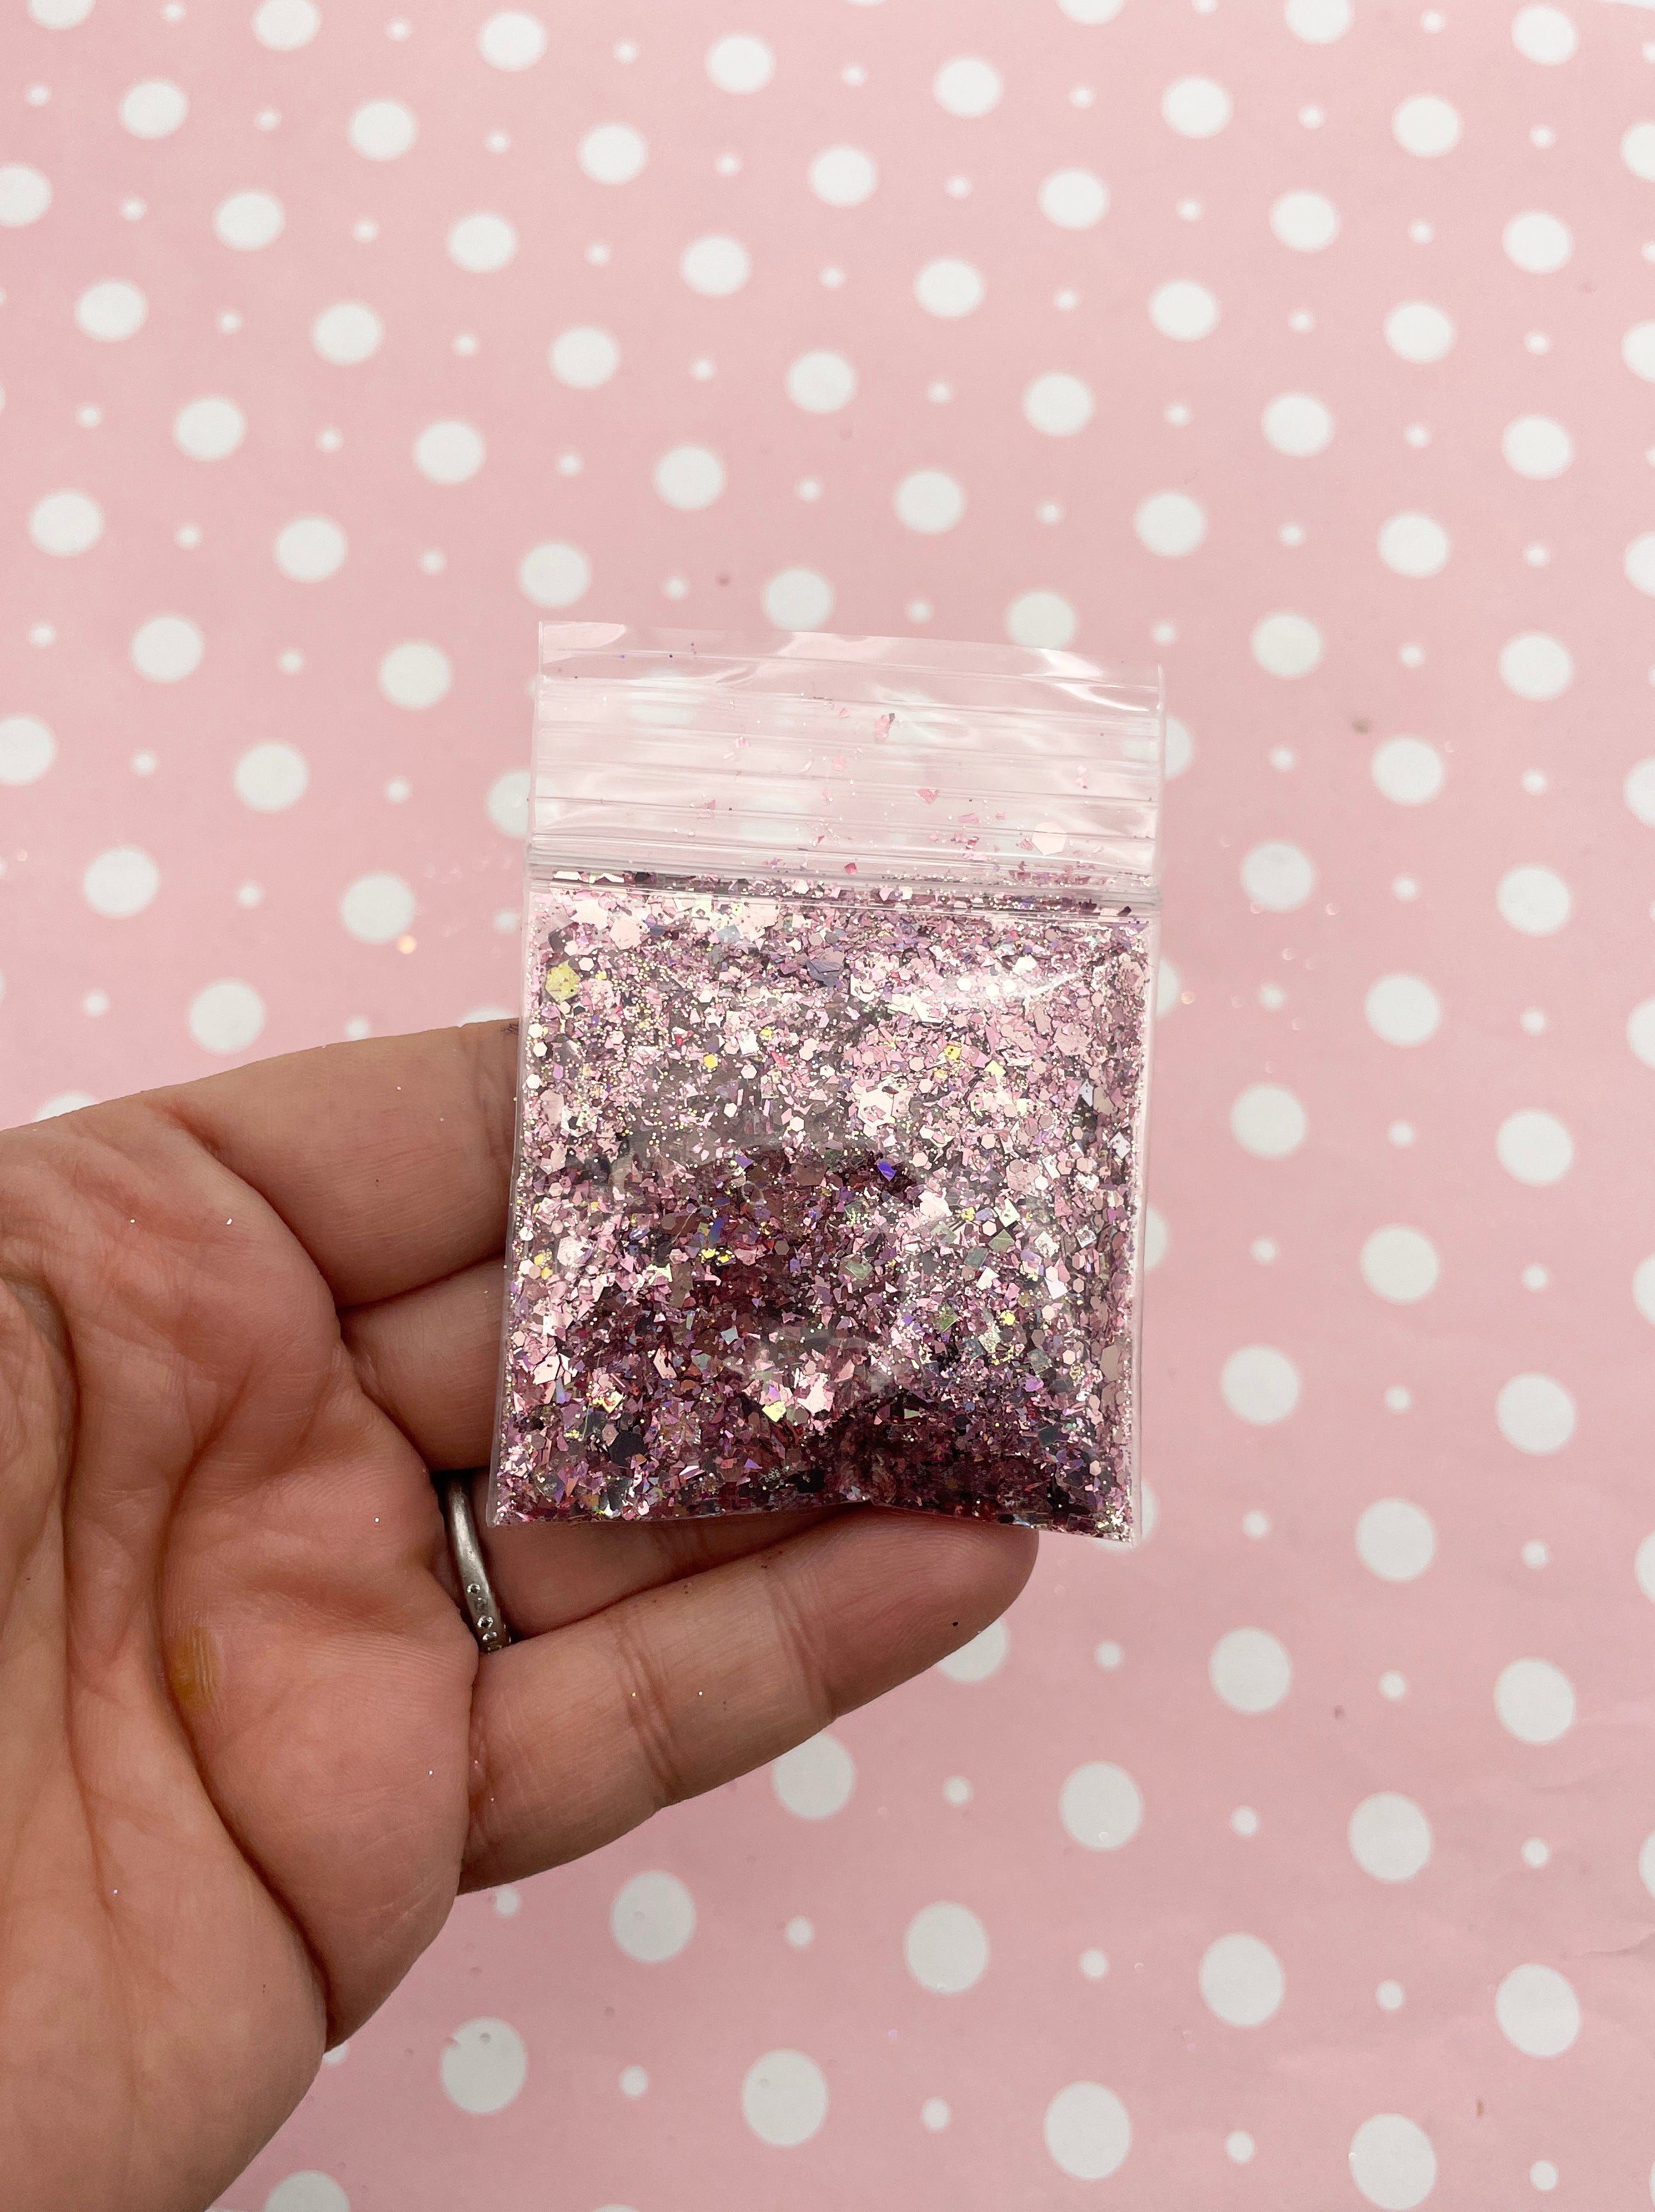 Pixiss Multi-Color Extra Fine Glitter 48 Pack